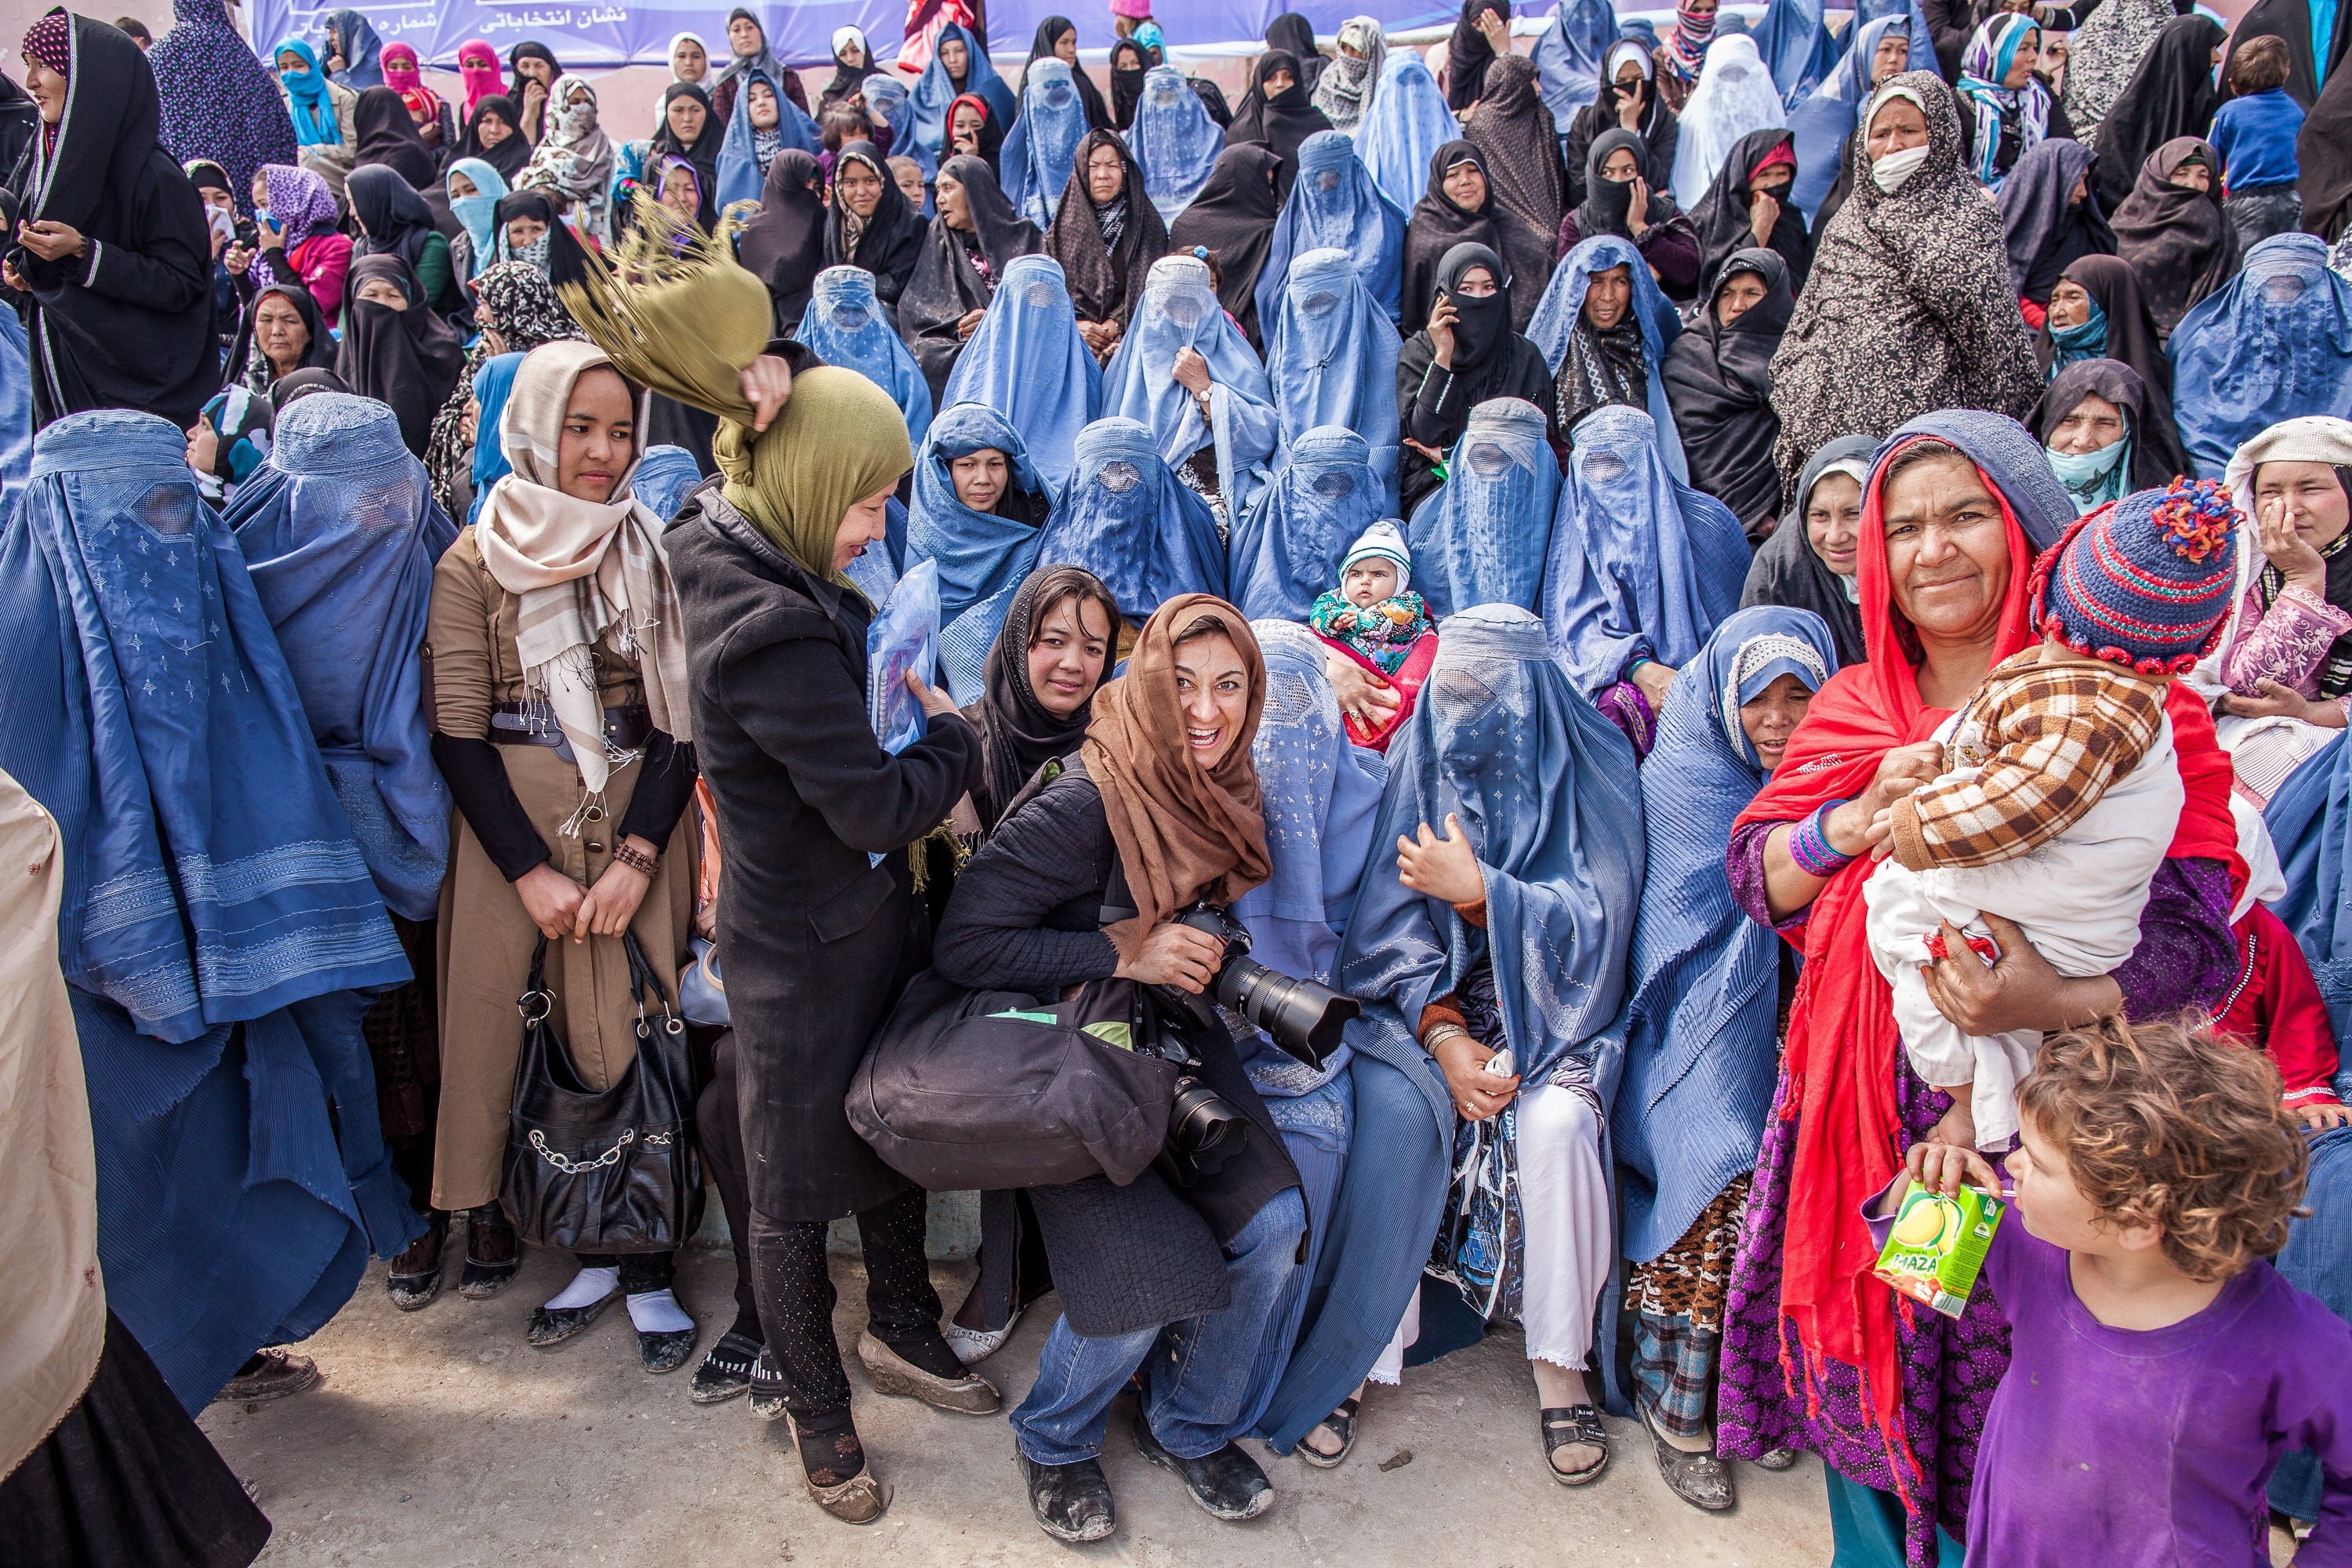 Lynsey Addario with Afghan women attending  a rally for Presidential candidate Zalmai Rassoul with Vice Presidential candidate Habiba Sarabi, in Mazar-e-Sharif, Afghanistan, March 27, 2014. (Bryan Denton—The New York Times)